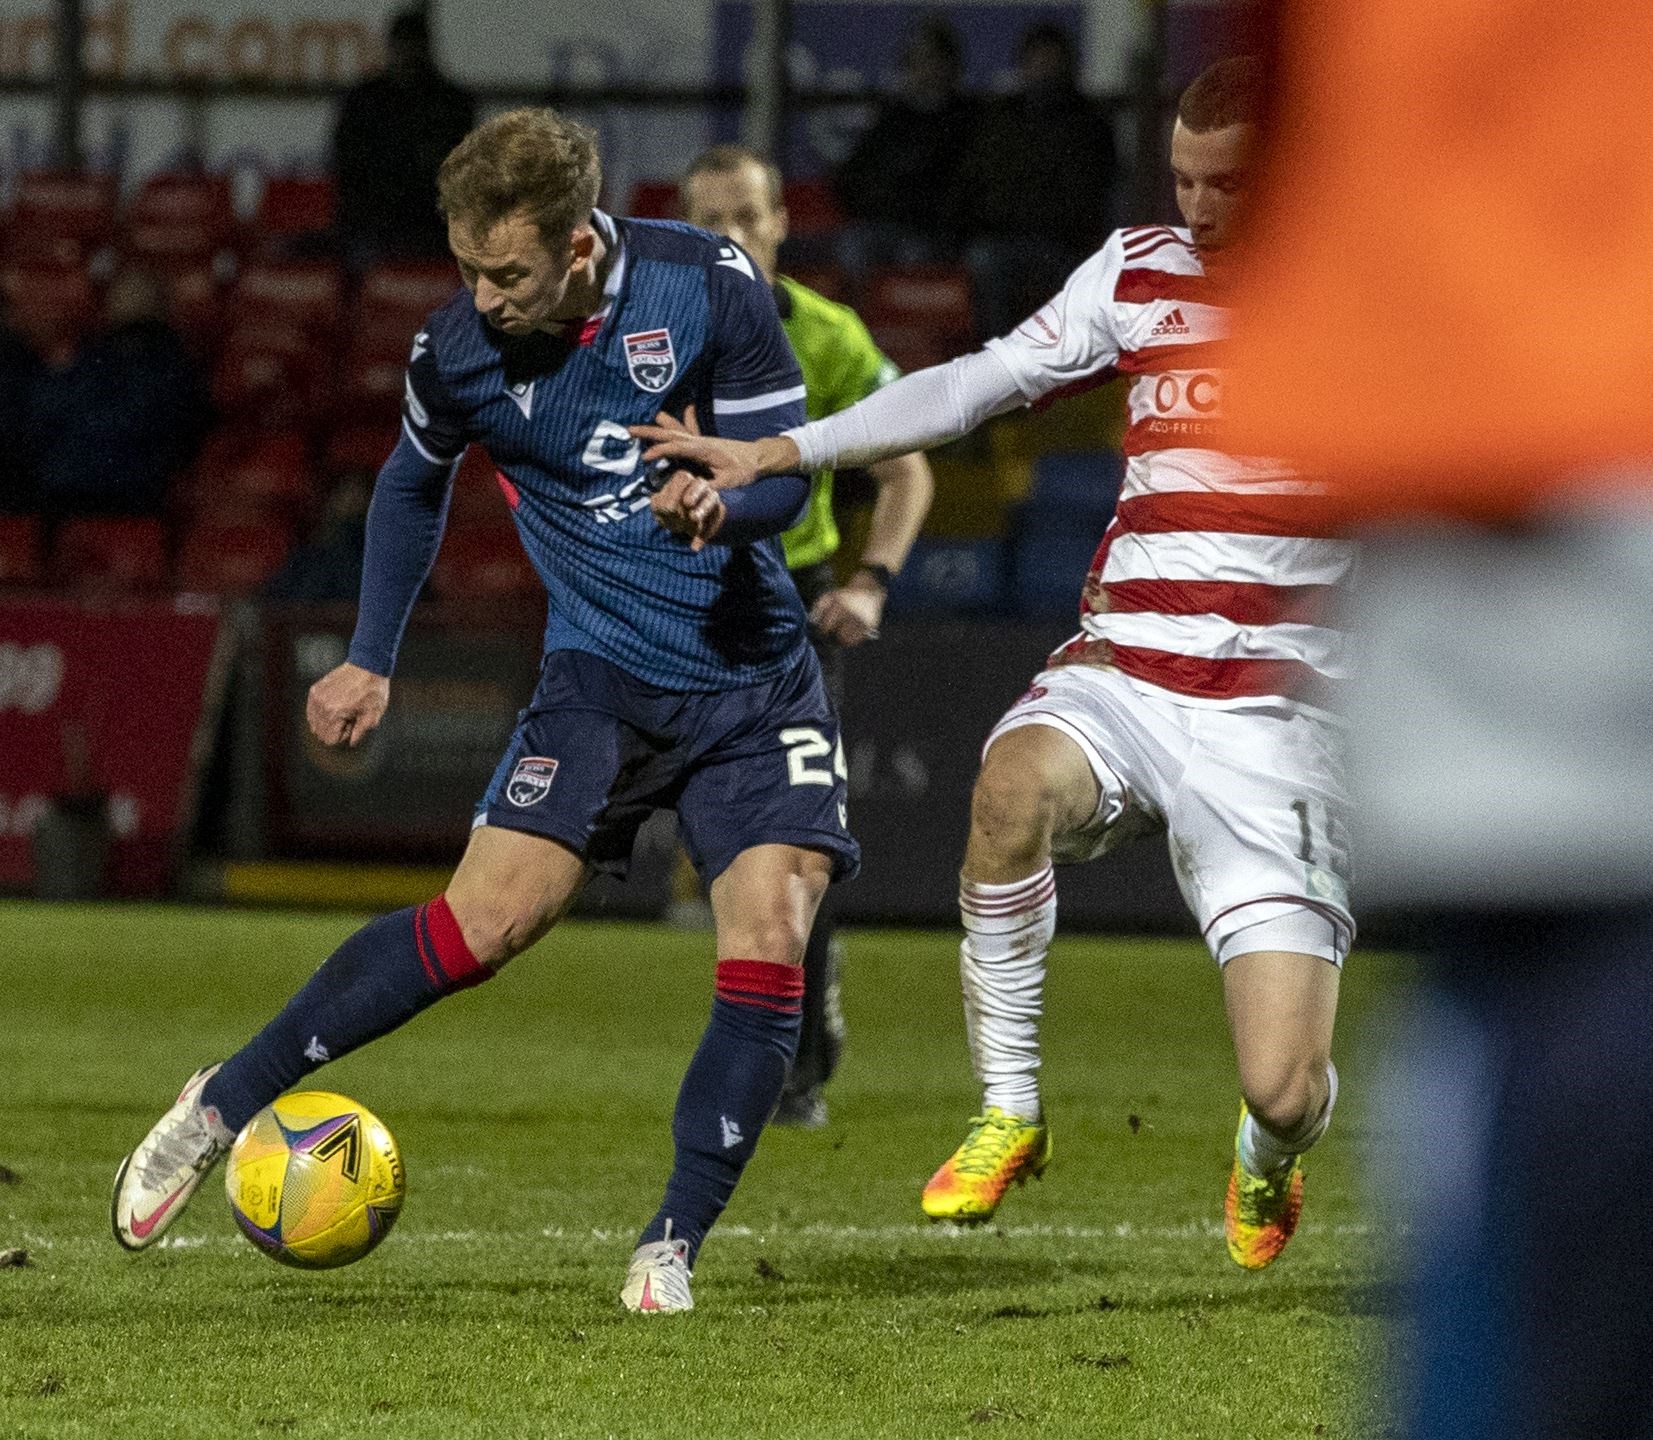 Harry Paton can set the tone for Ross County with his pressing all over the park.